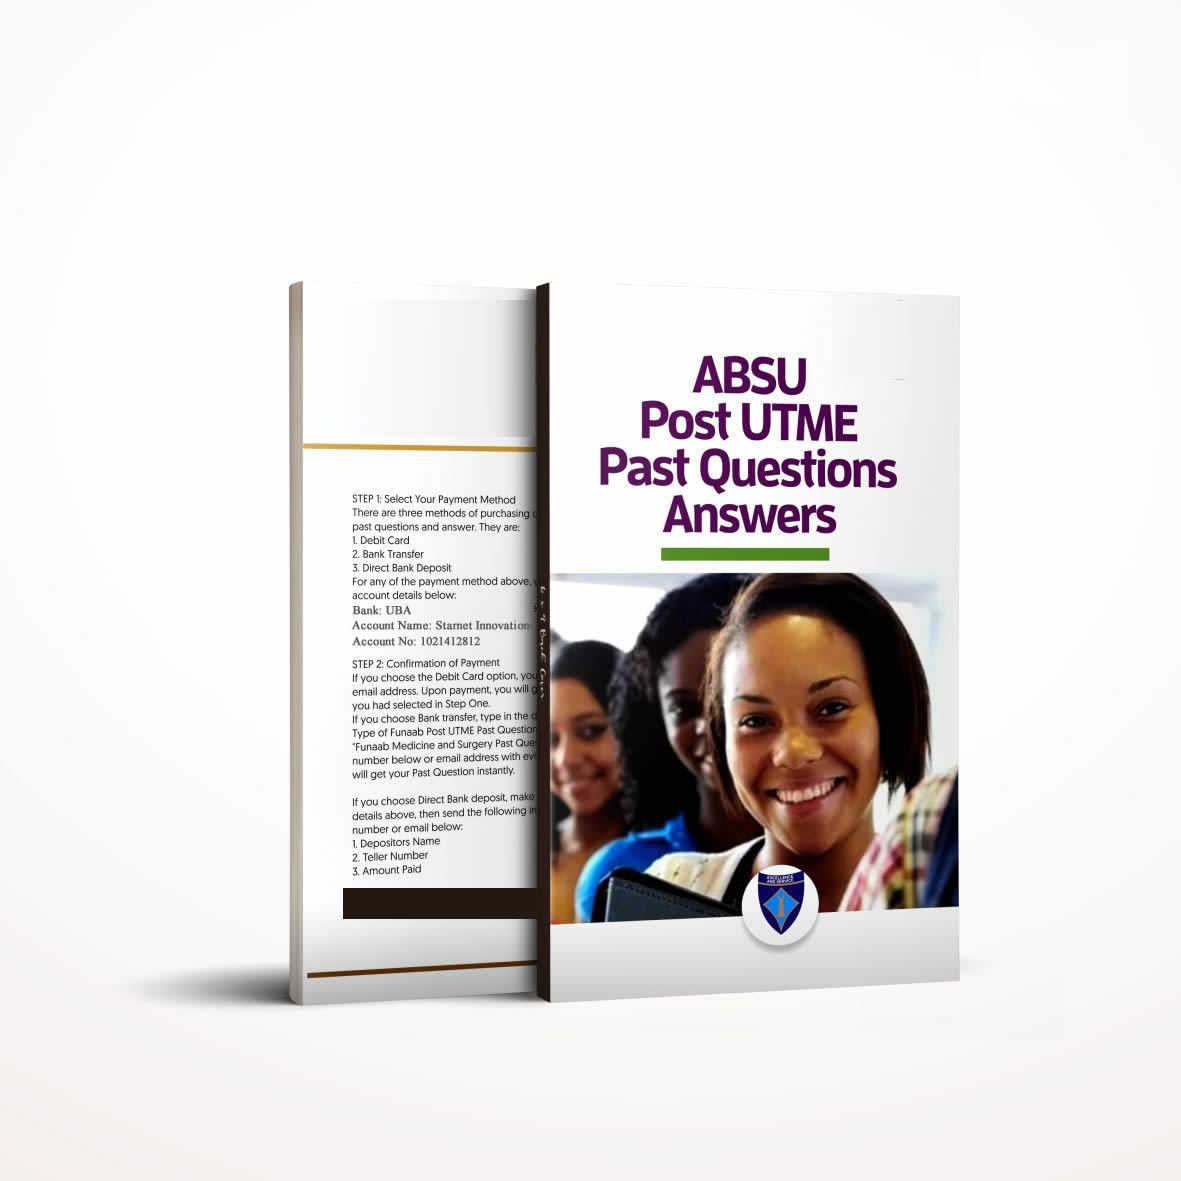 ABSU Post UTME past questions and answers